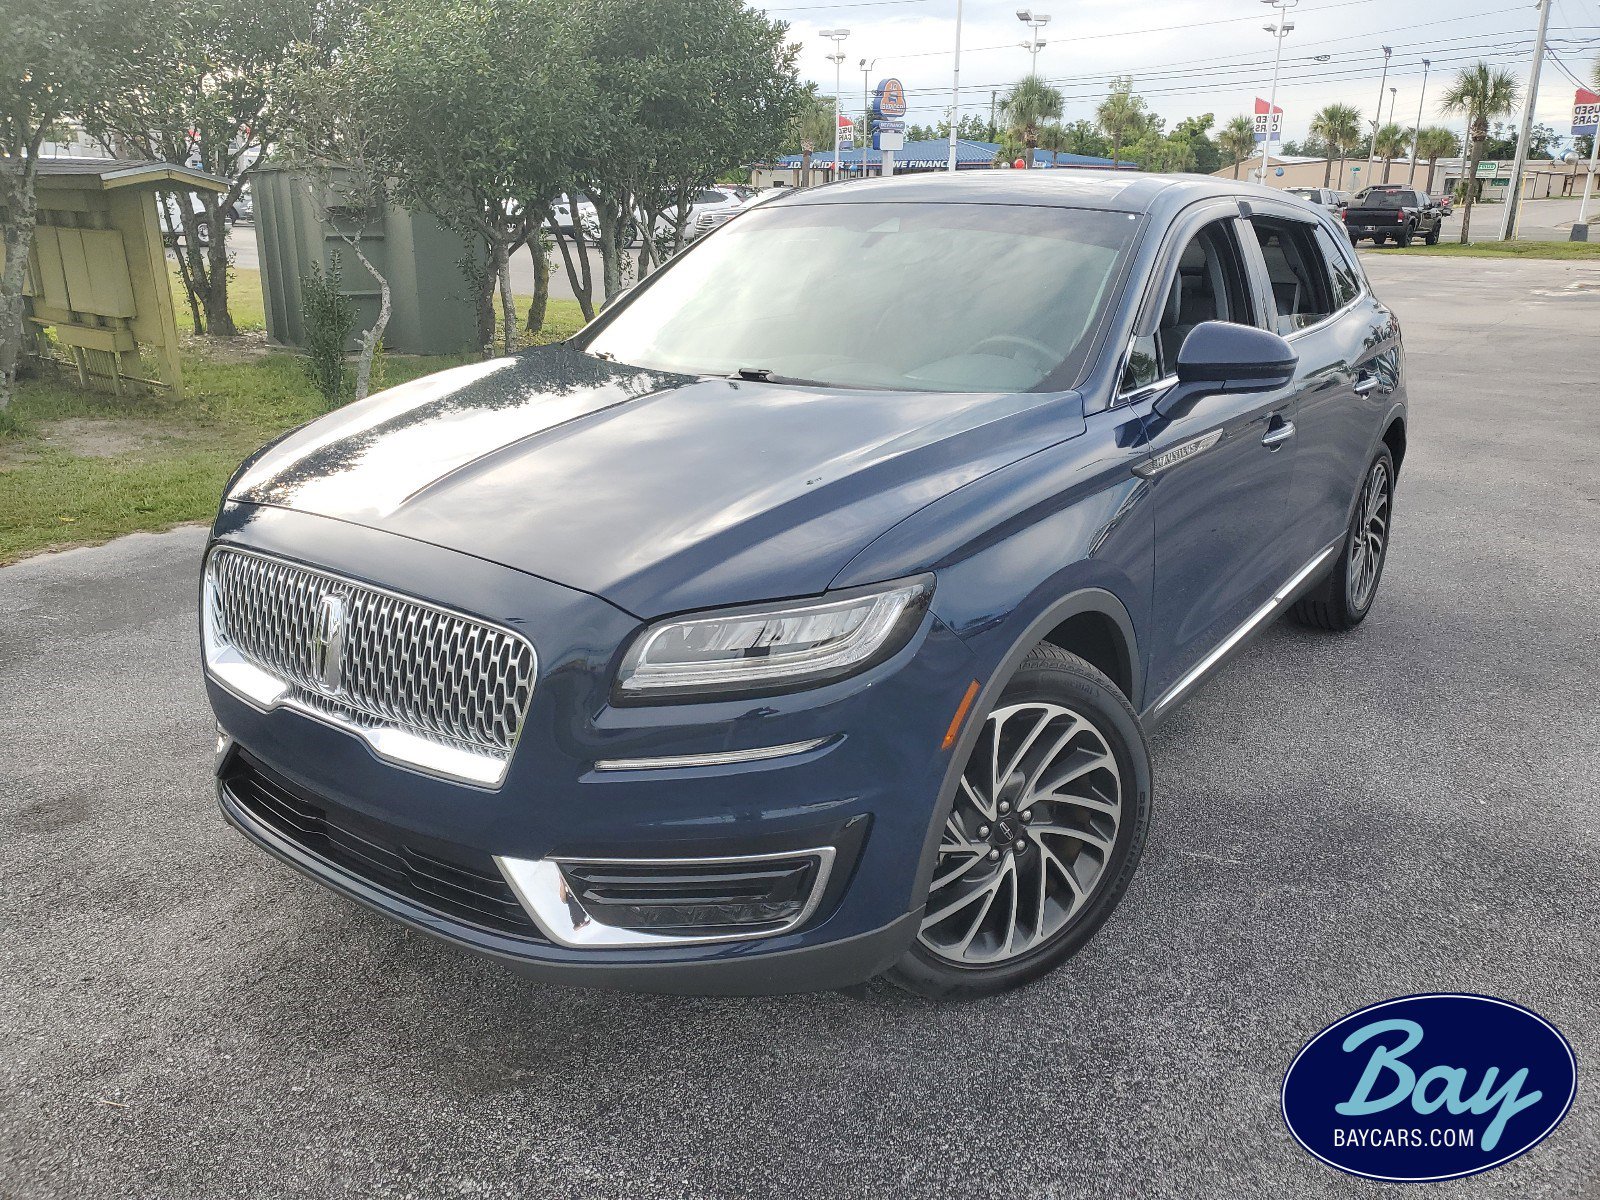 Used 2019 Lincoln Nautilus For Sale at Bay Cars | VIN: 2LMPJ6LPXKBL21729